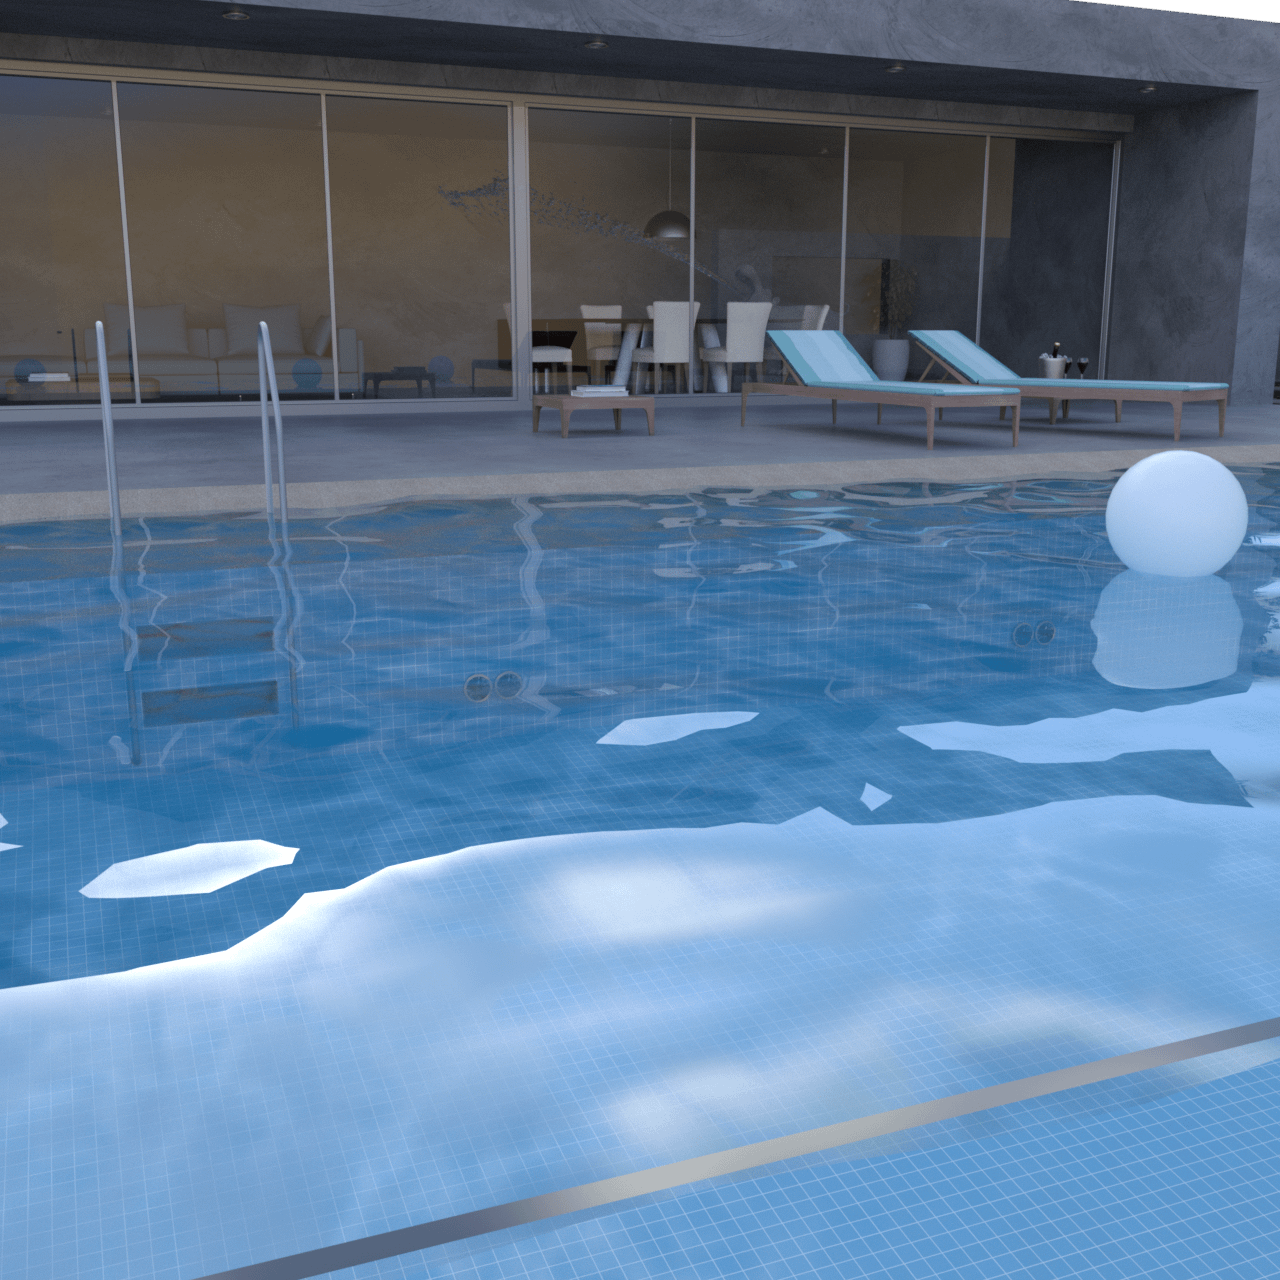 Swimming pool 3d model with a house with big windows in the background